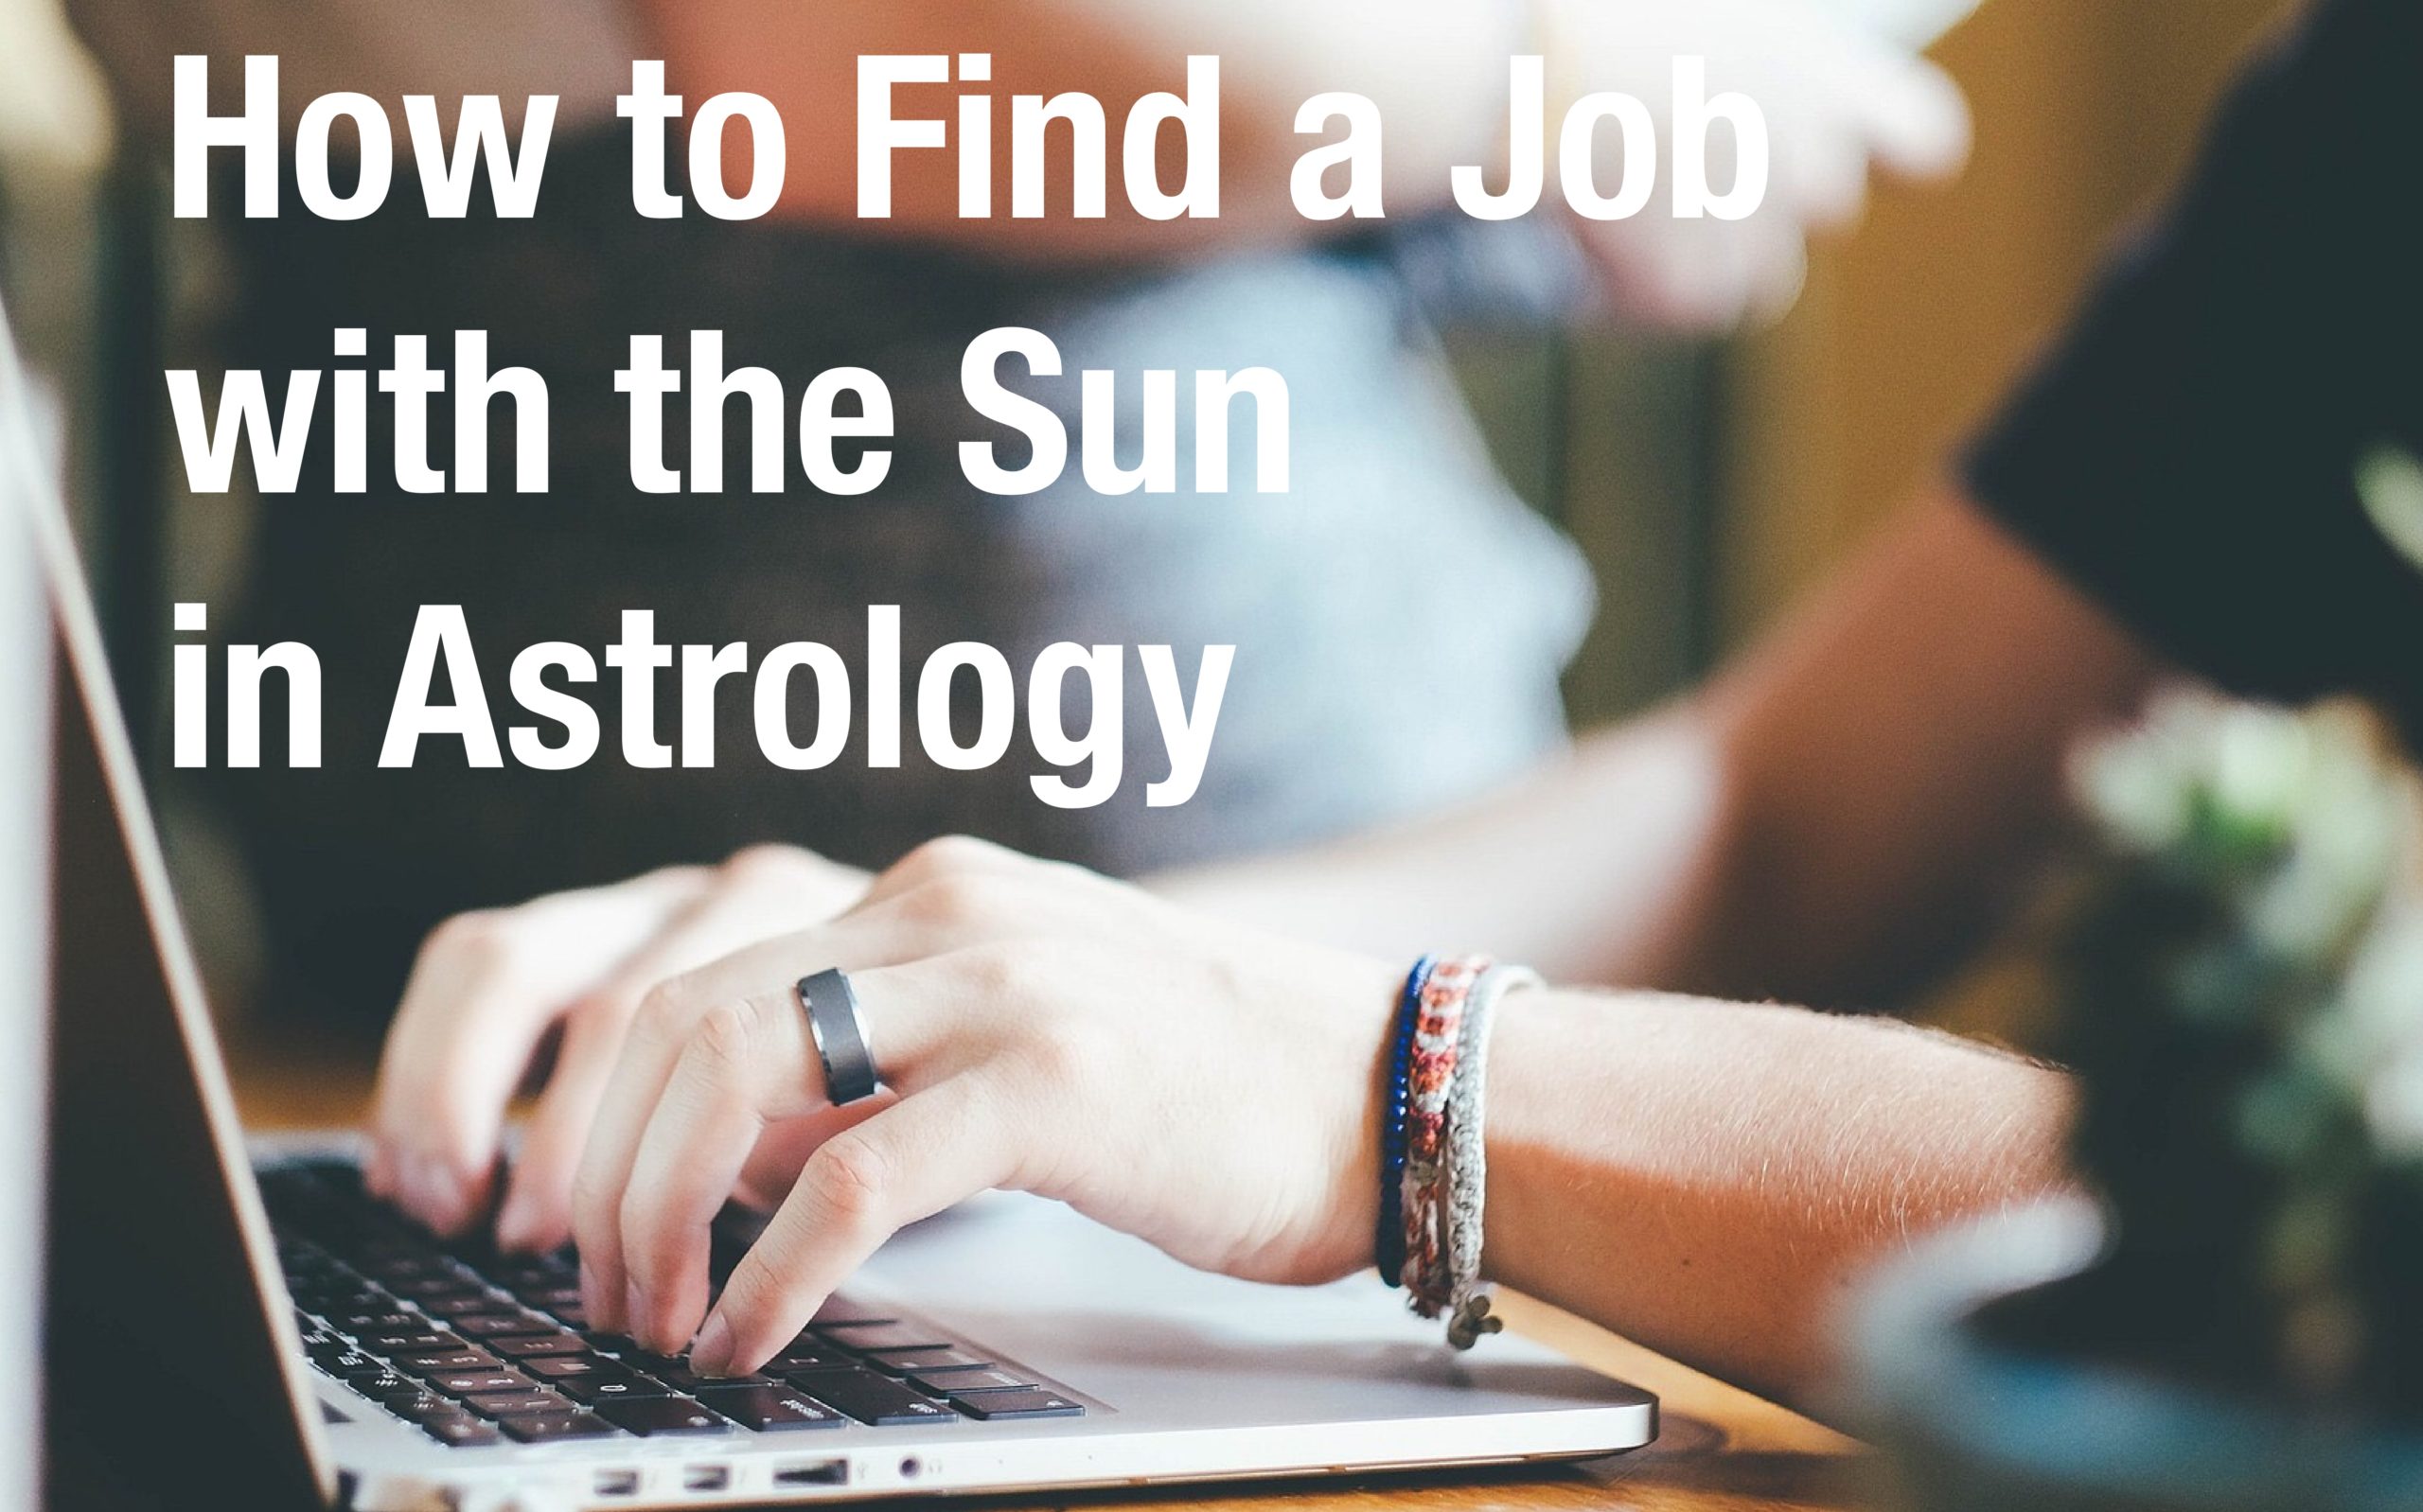 How to Find a Job with the Sun in Astrology